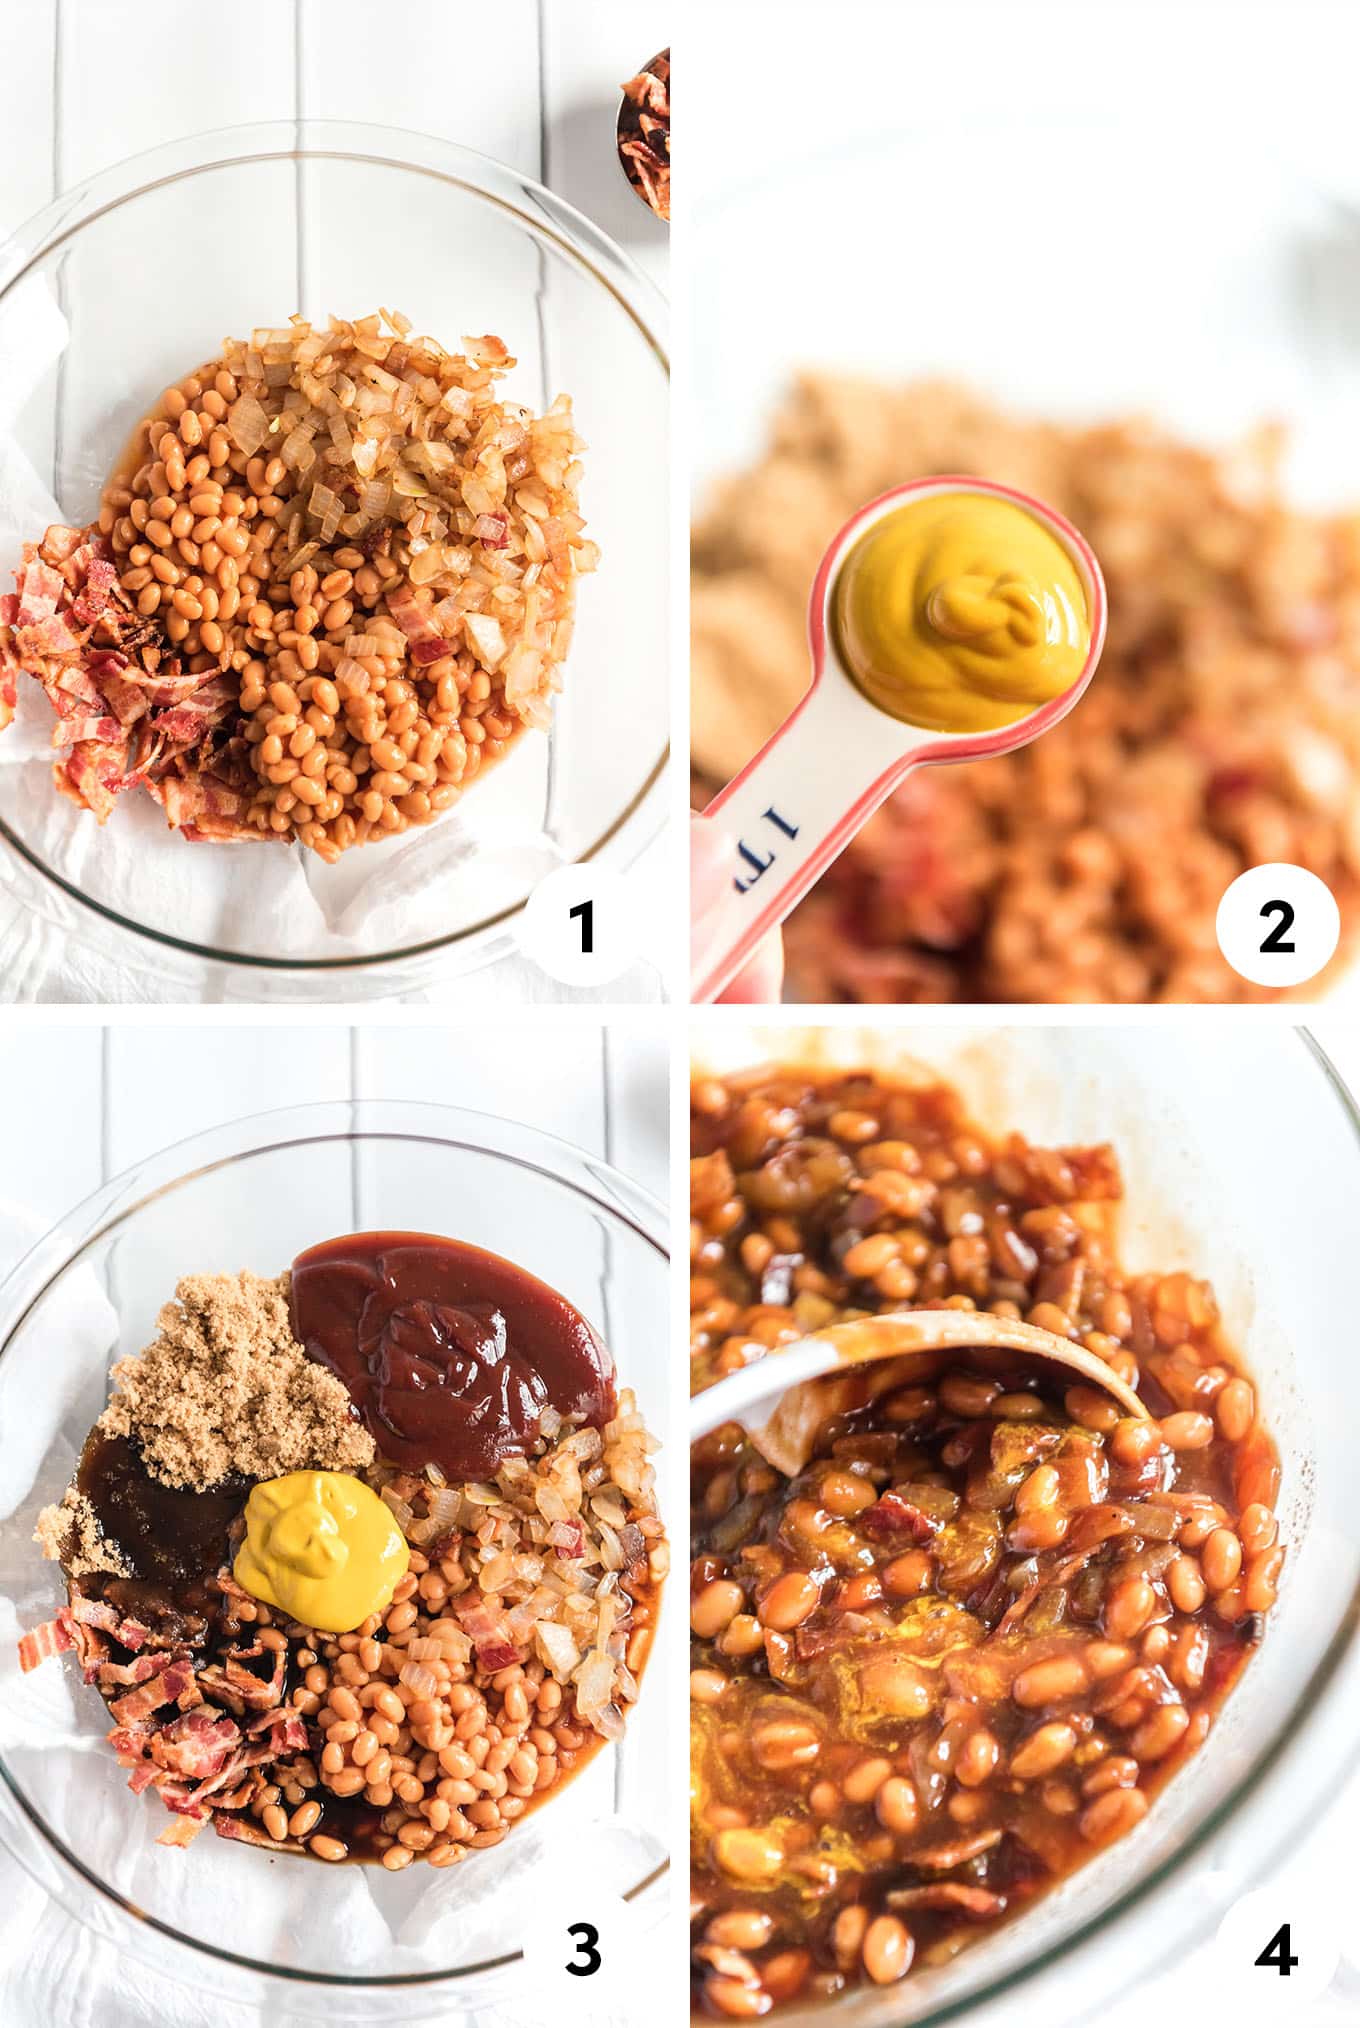 A collage showing the different steps to make bbq baked beans from scratch.